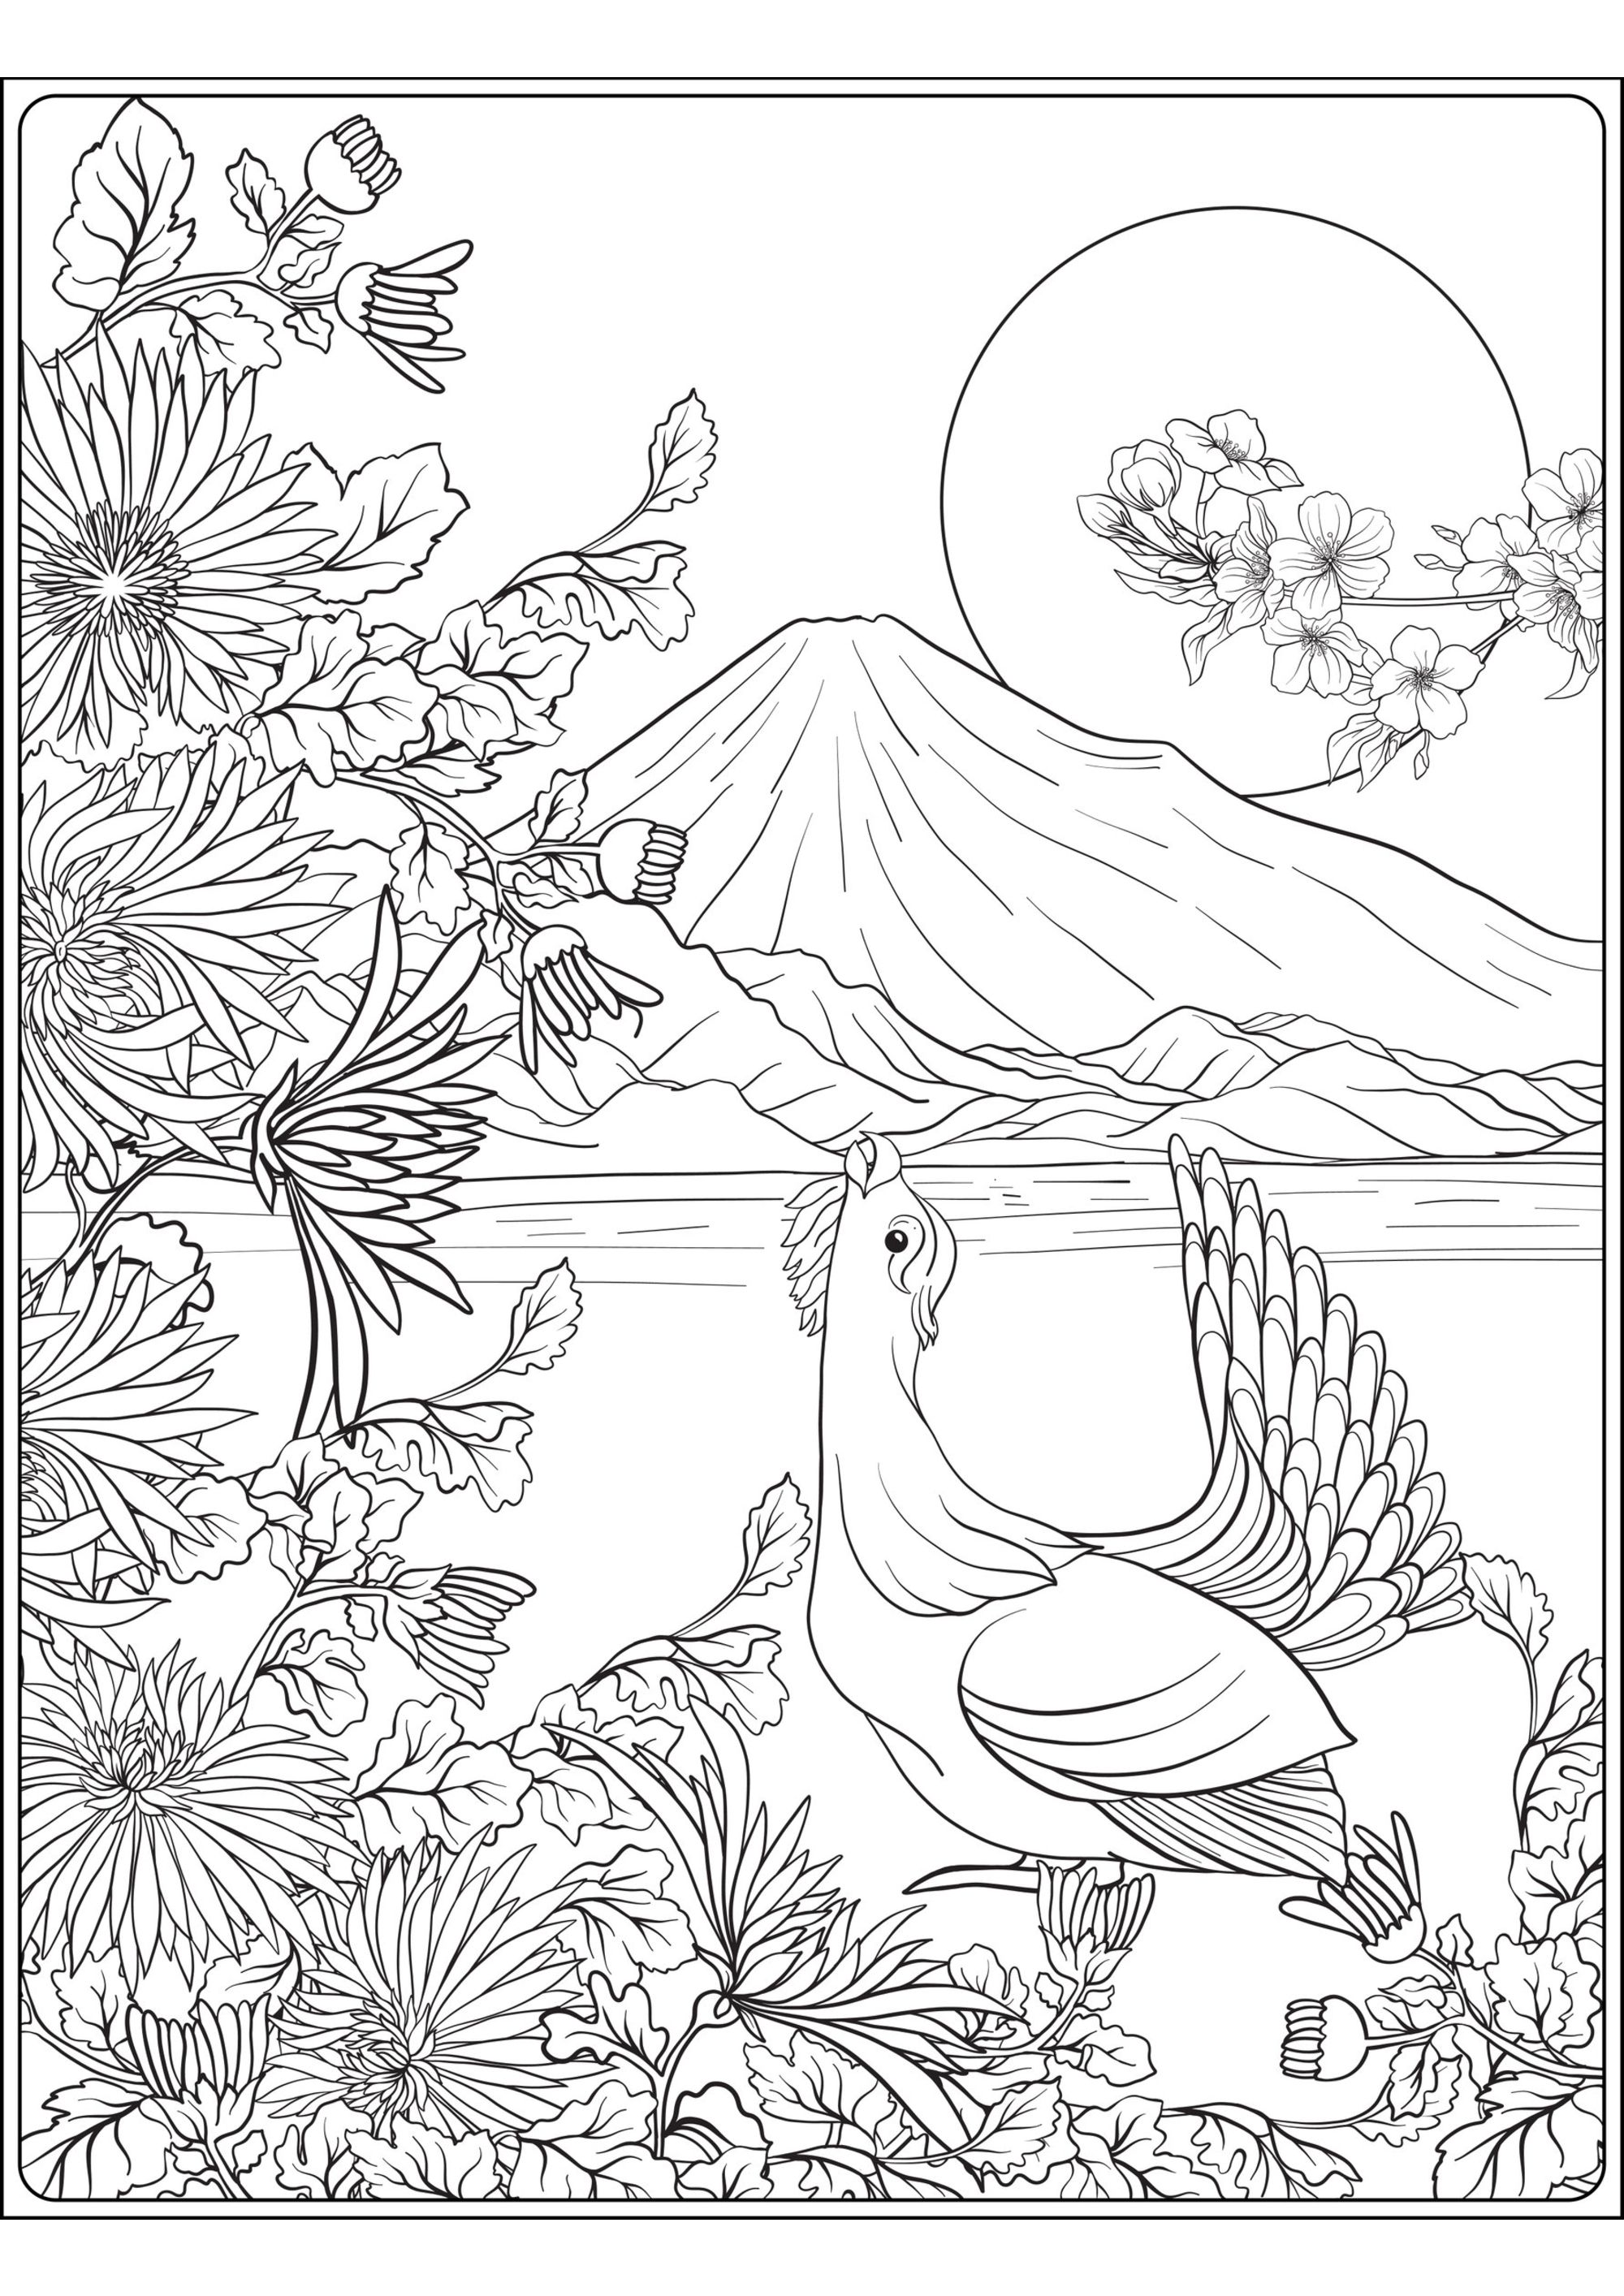 Mount Fuji and bird. A superb coloring page on the theme of Japan, with a bird, Mount Fuji, and a foreground filled with pretty plants and flowers.